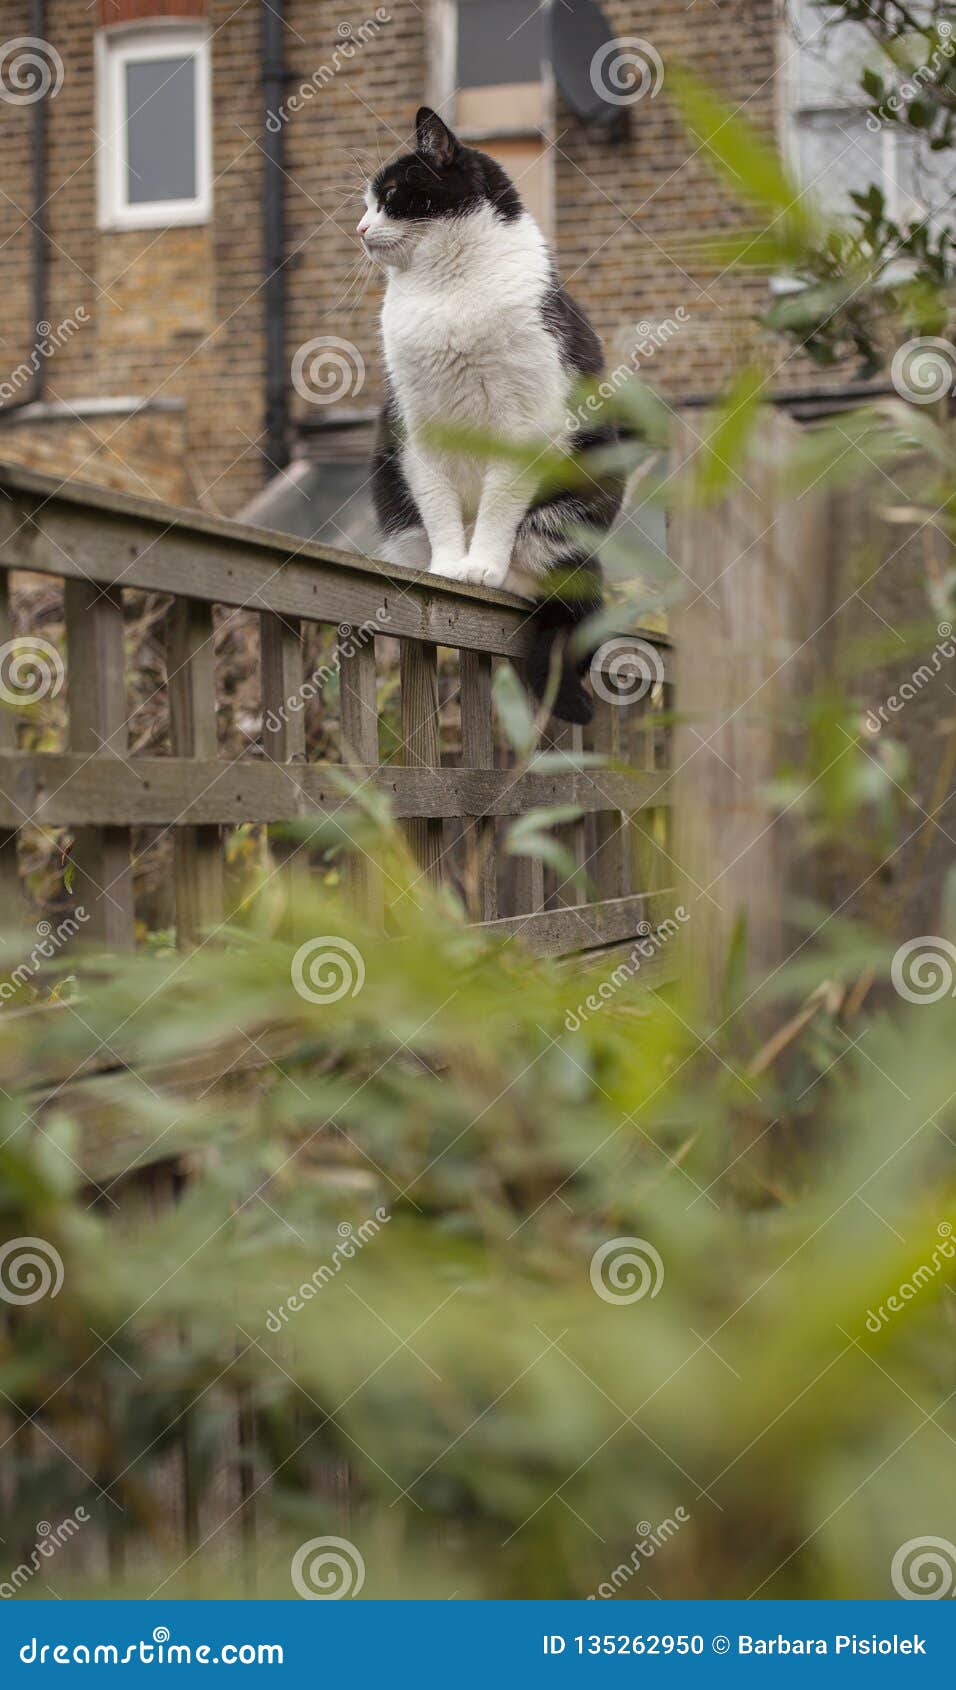 sweepy - a fluffy cat seen trough some green bamboo leaves; a garden in london, england.